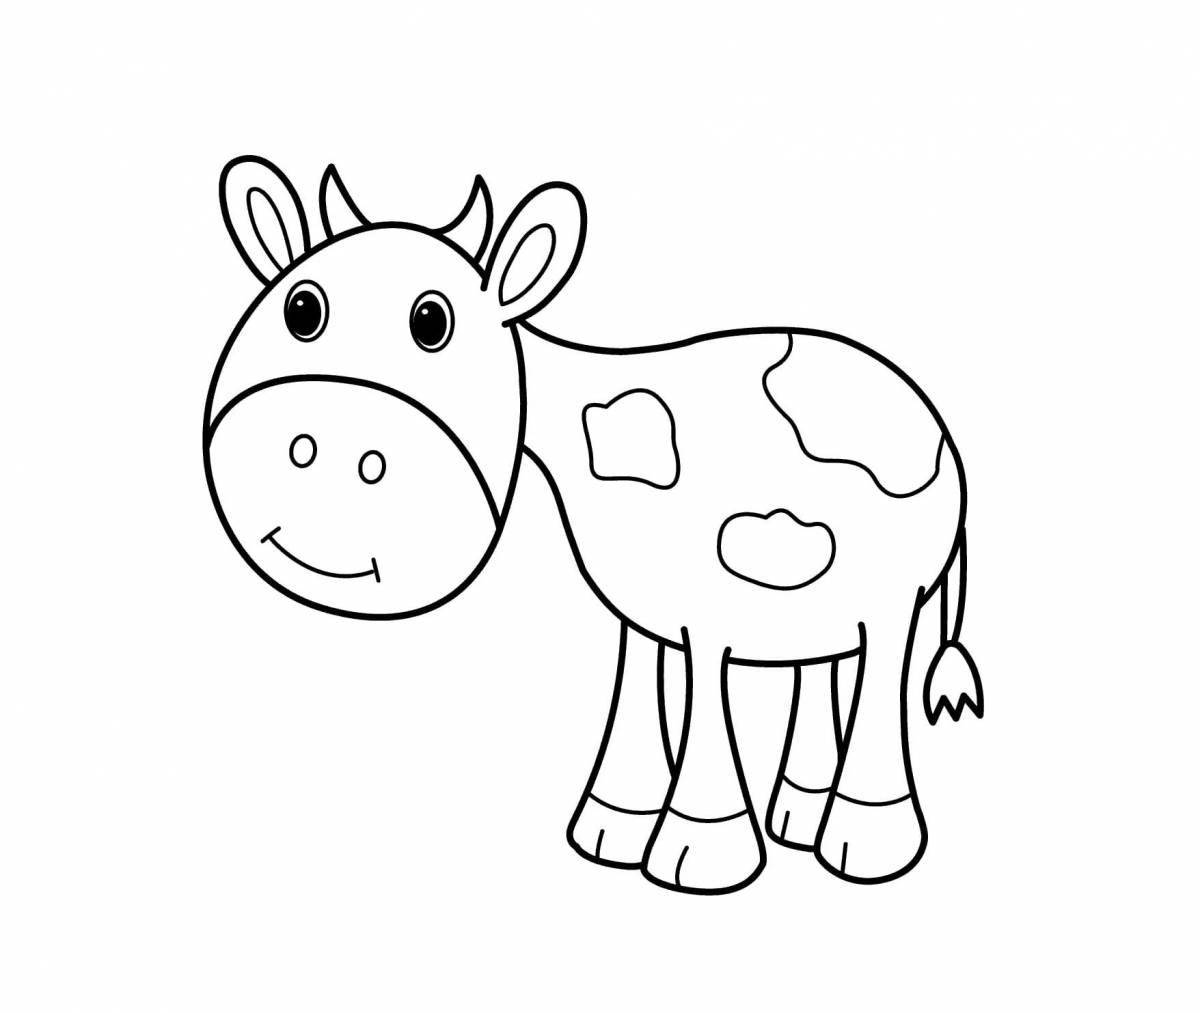 Cow relaxed coloring page